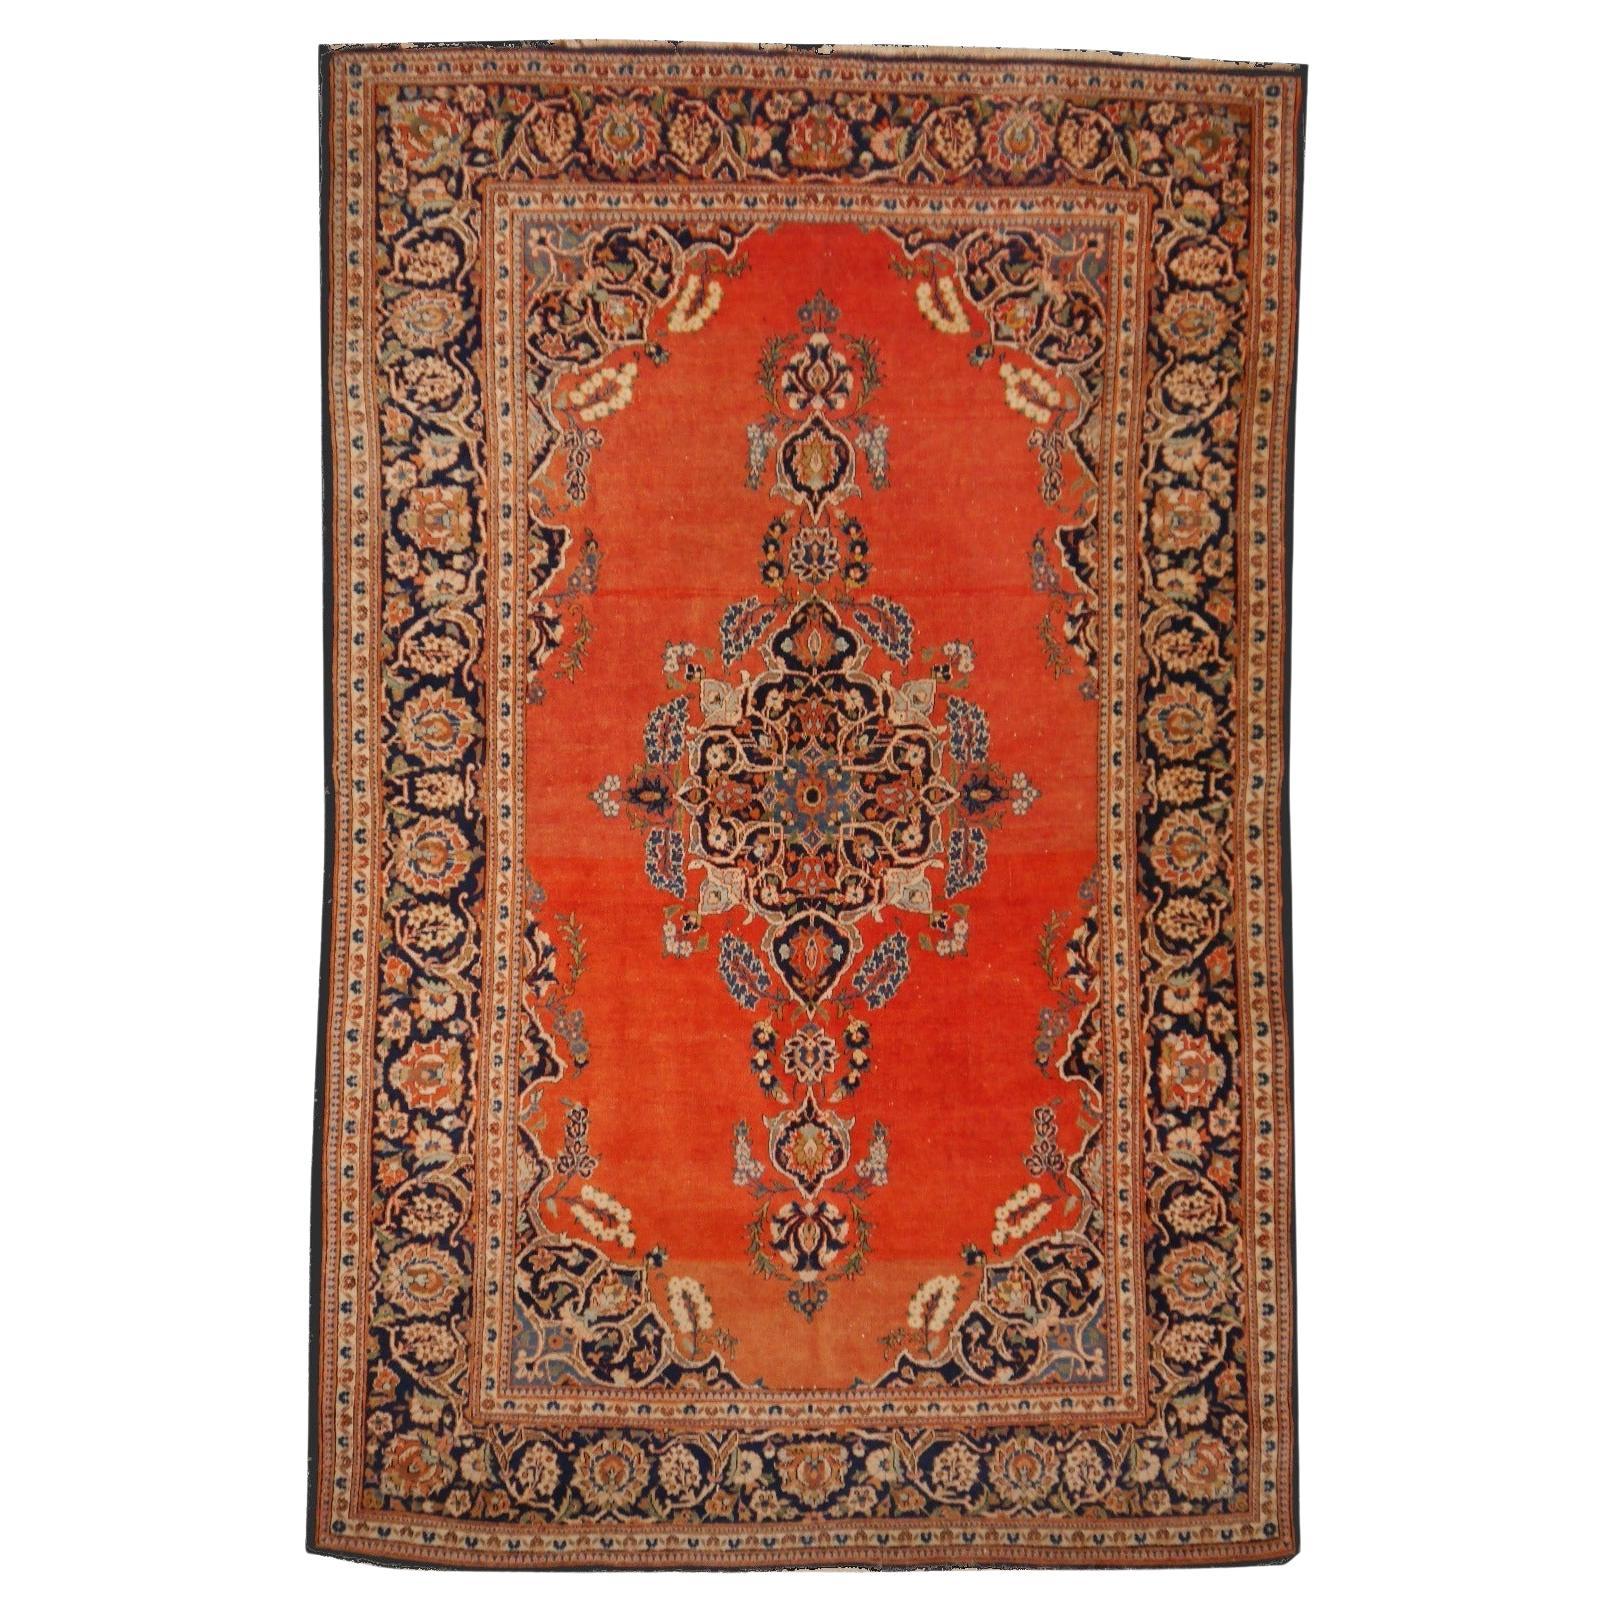 Kashan vintage rug, hand-knotted in salmon and blue - Djoharian Collection For Sale